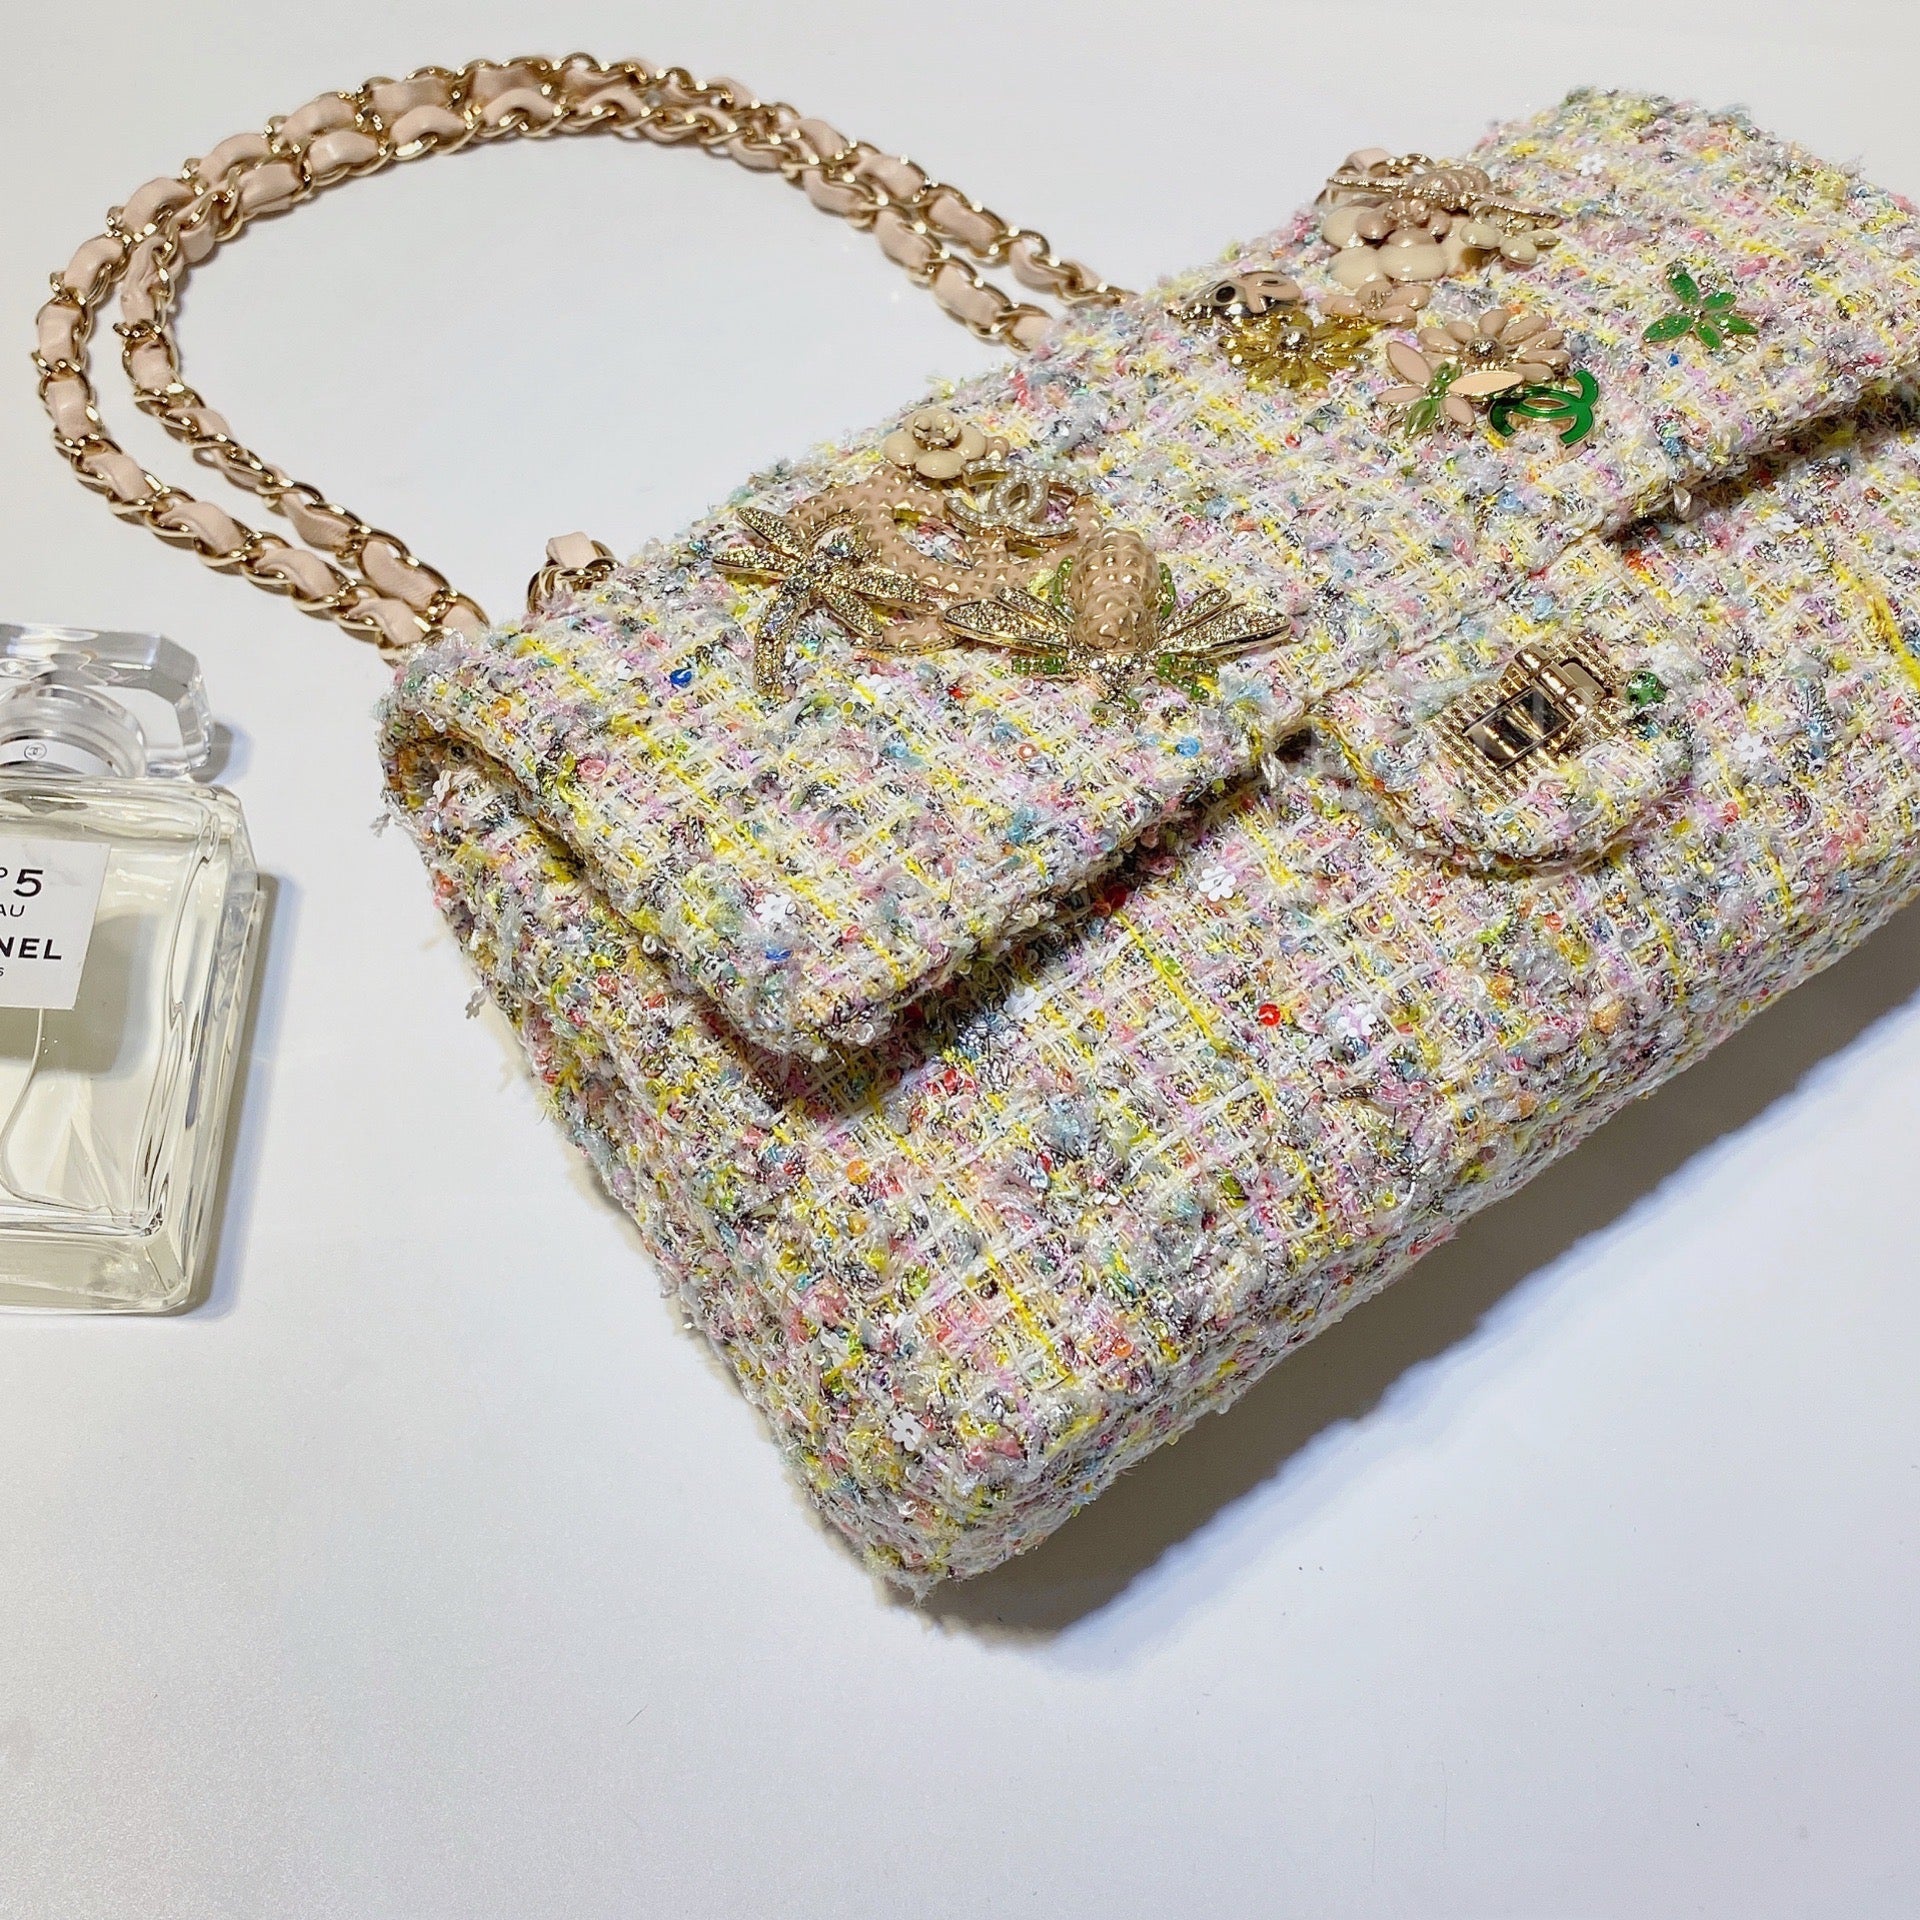 Chanel 2.55 Reissue Classic Flap Limited Garden Party 225 Double Tweed Bag